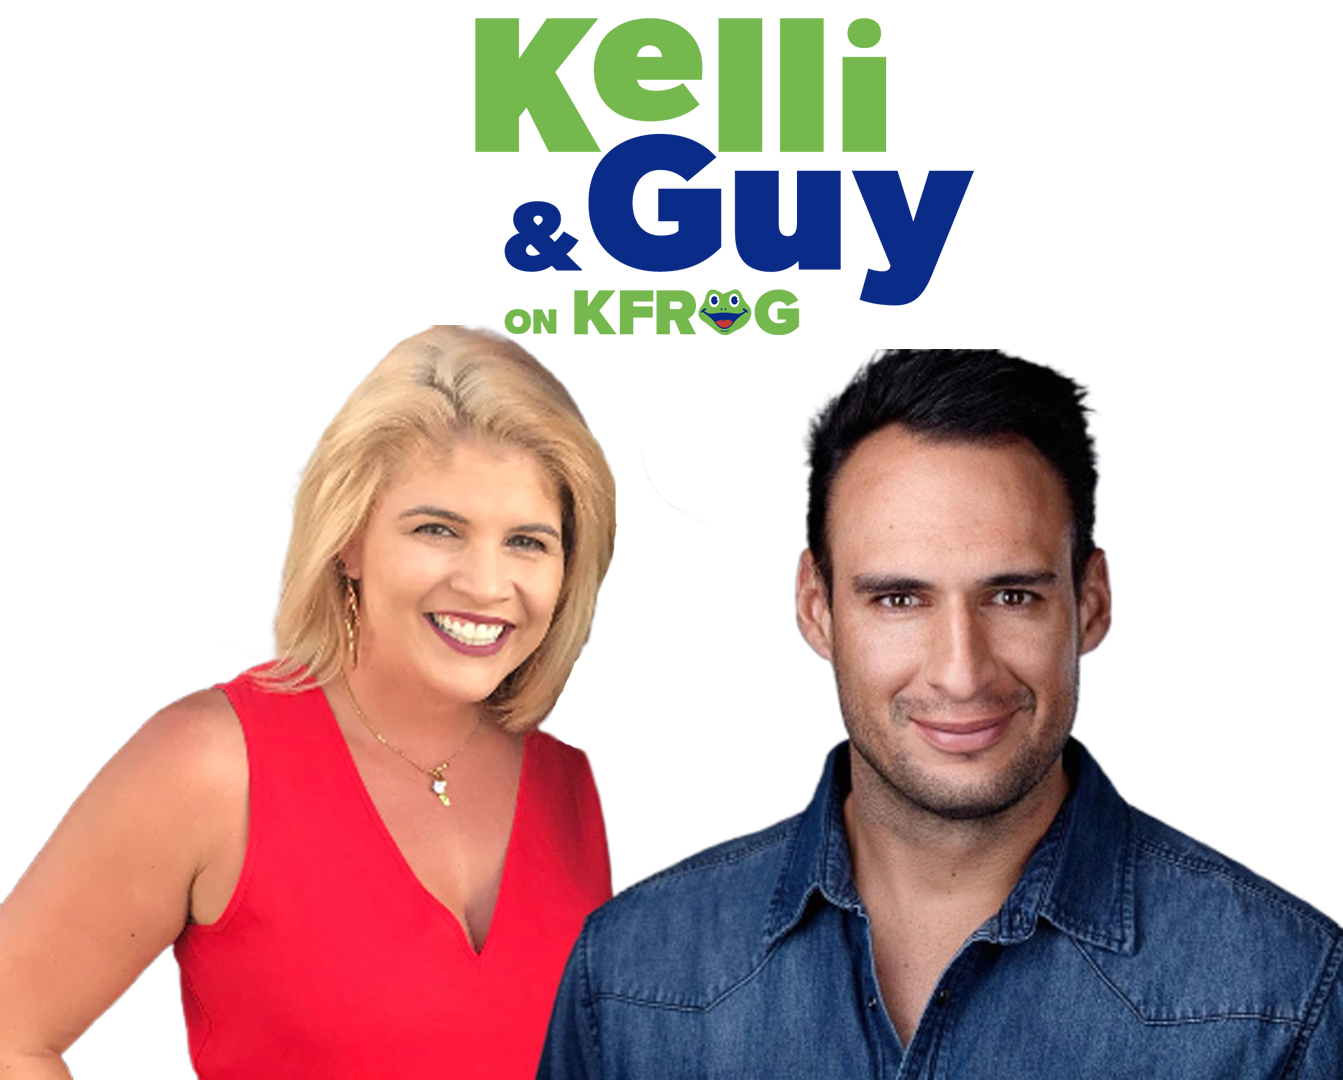 Hardy spoke to Kelli and Guy about a special Stagecoach guest who unfortunately had to cancel